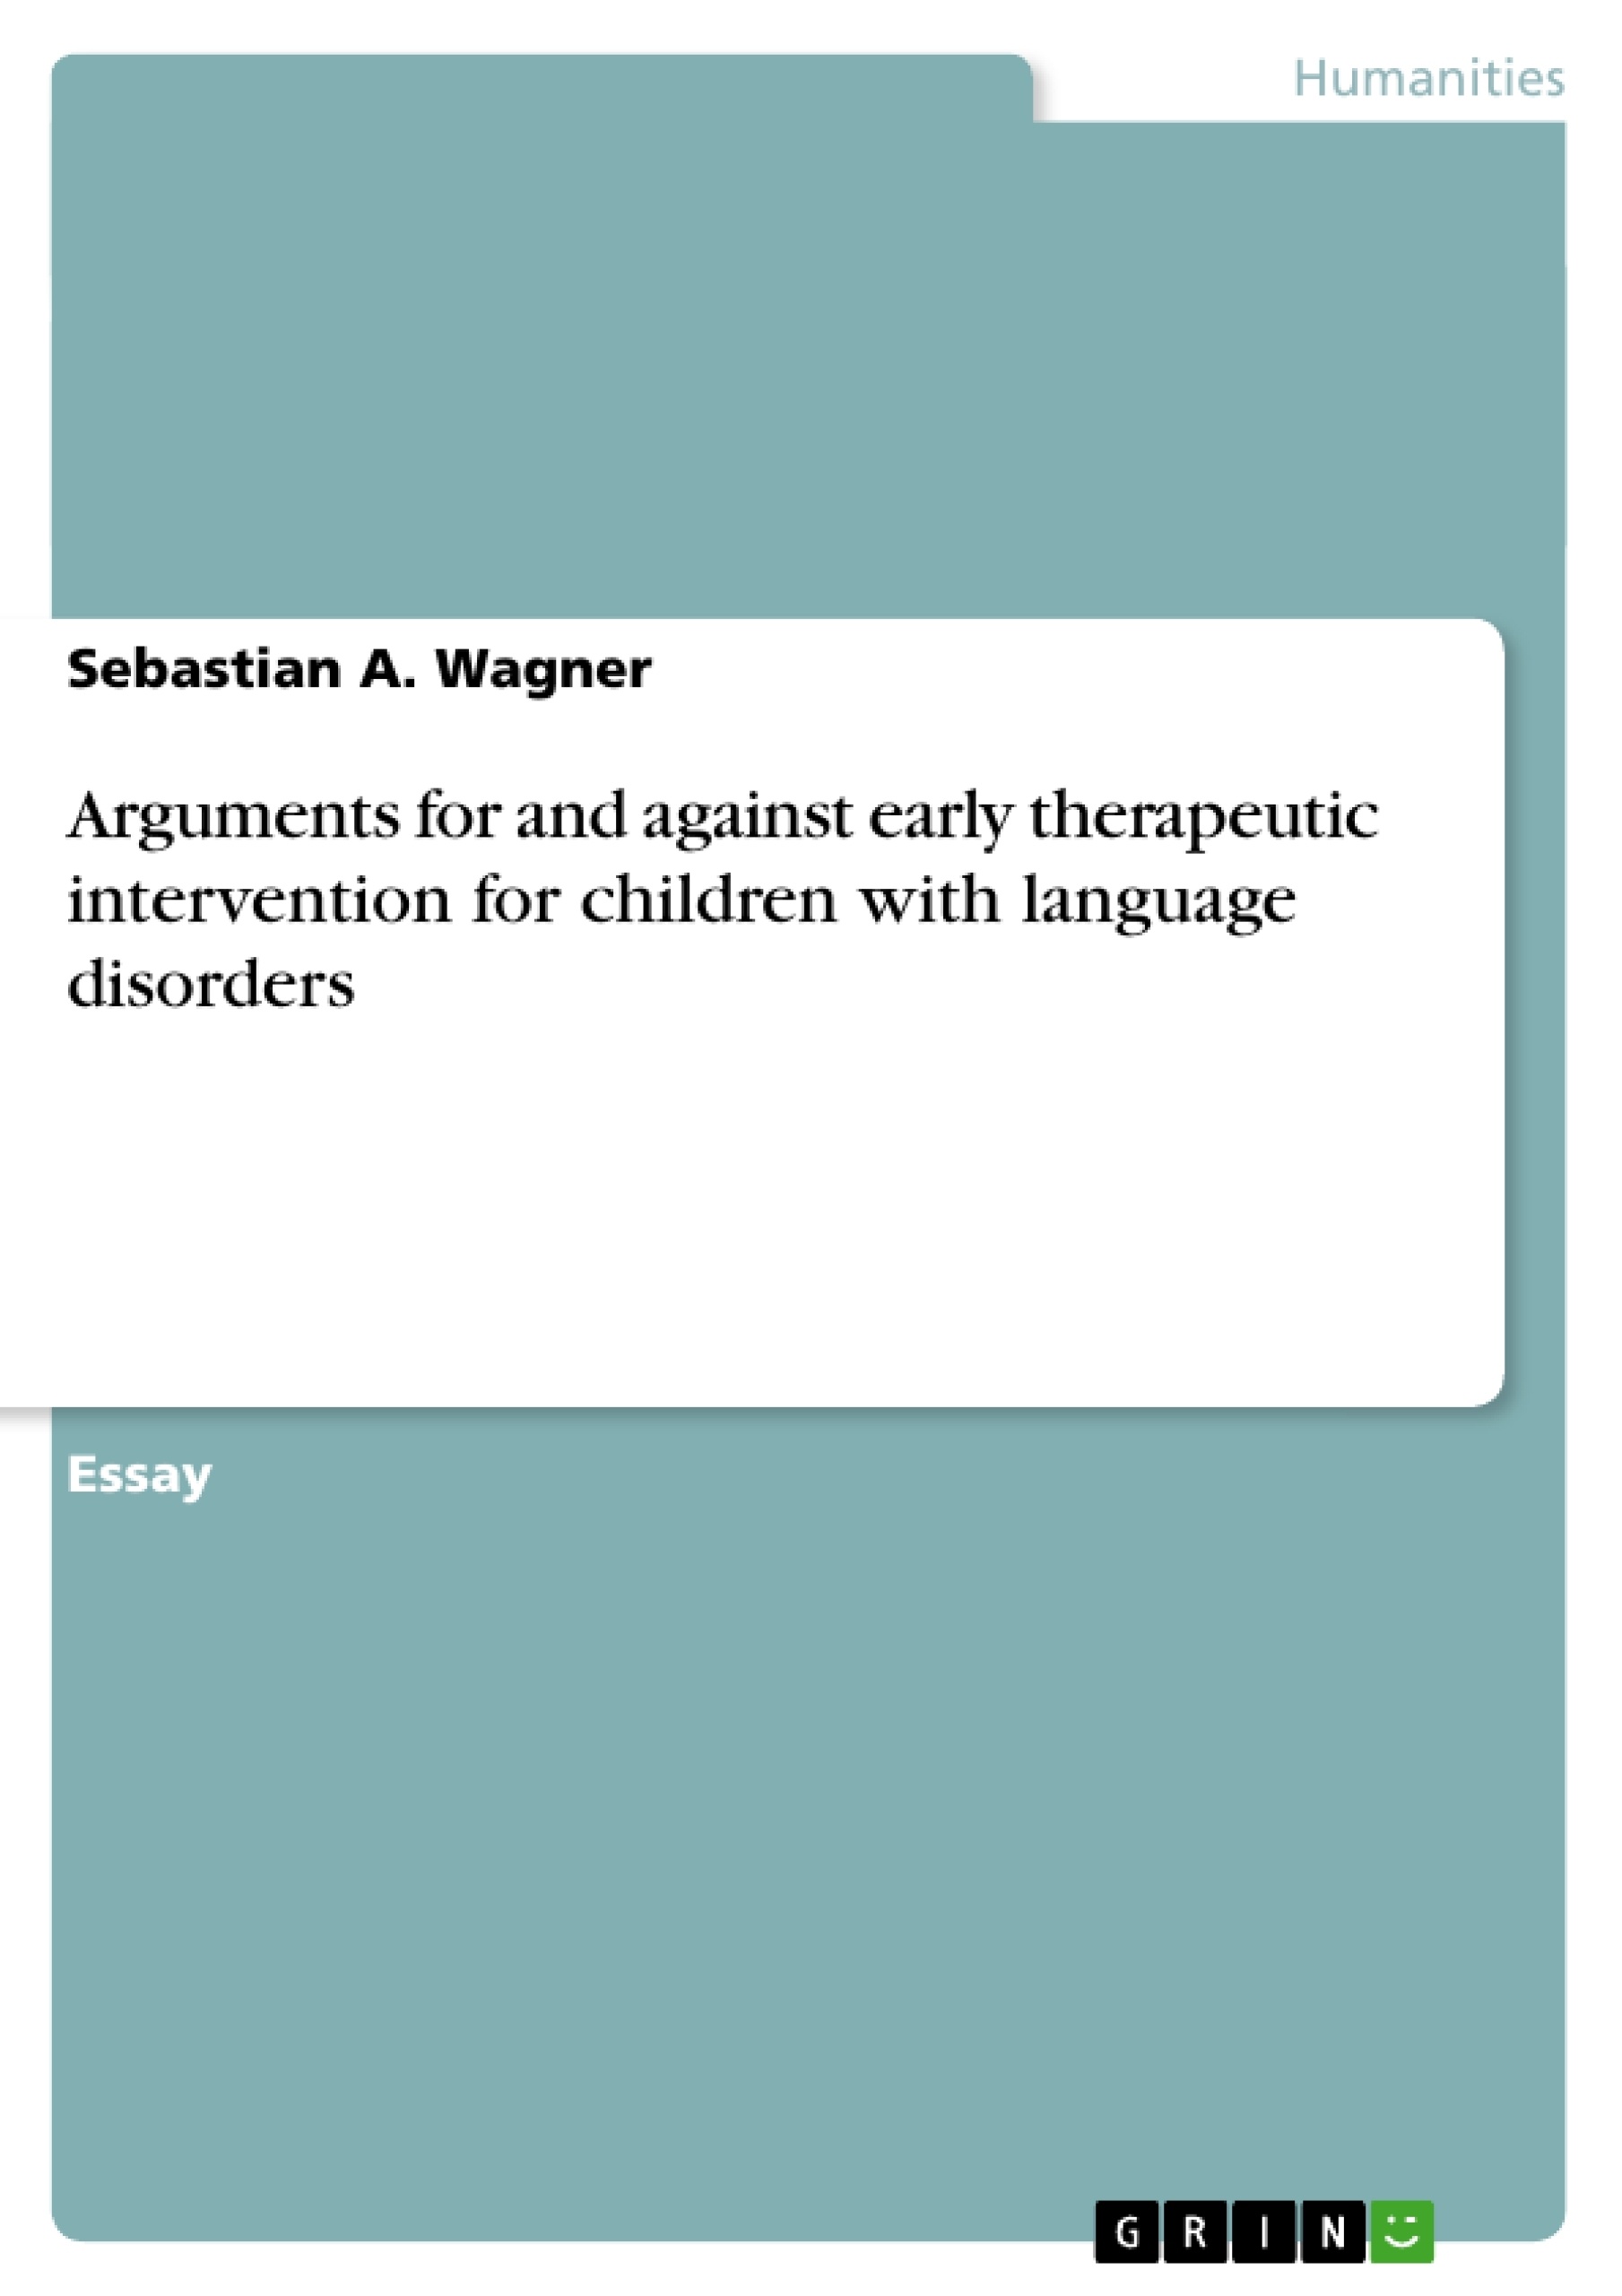 Title: Arguments for and against early therapeutic intervention for children with language disorders